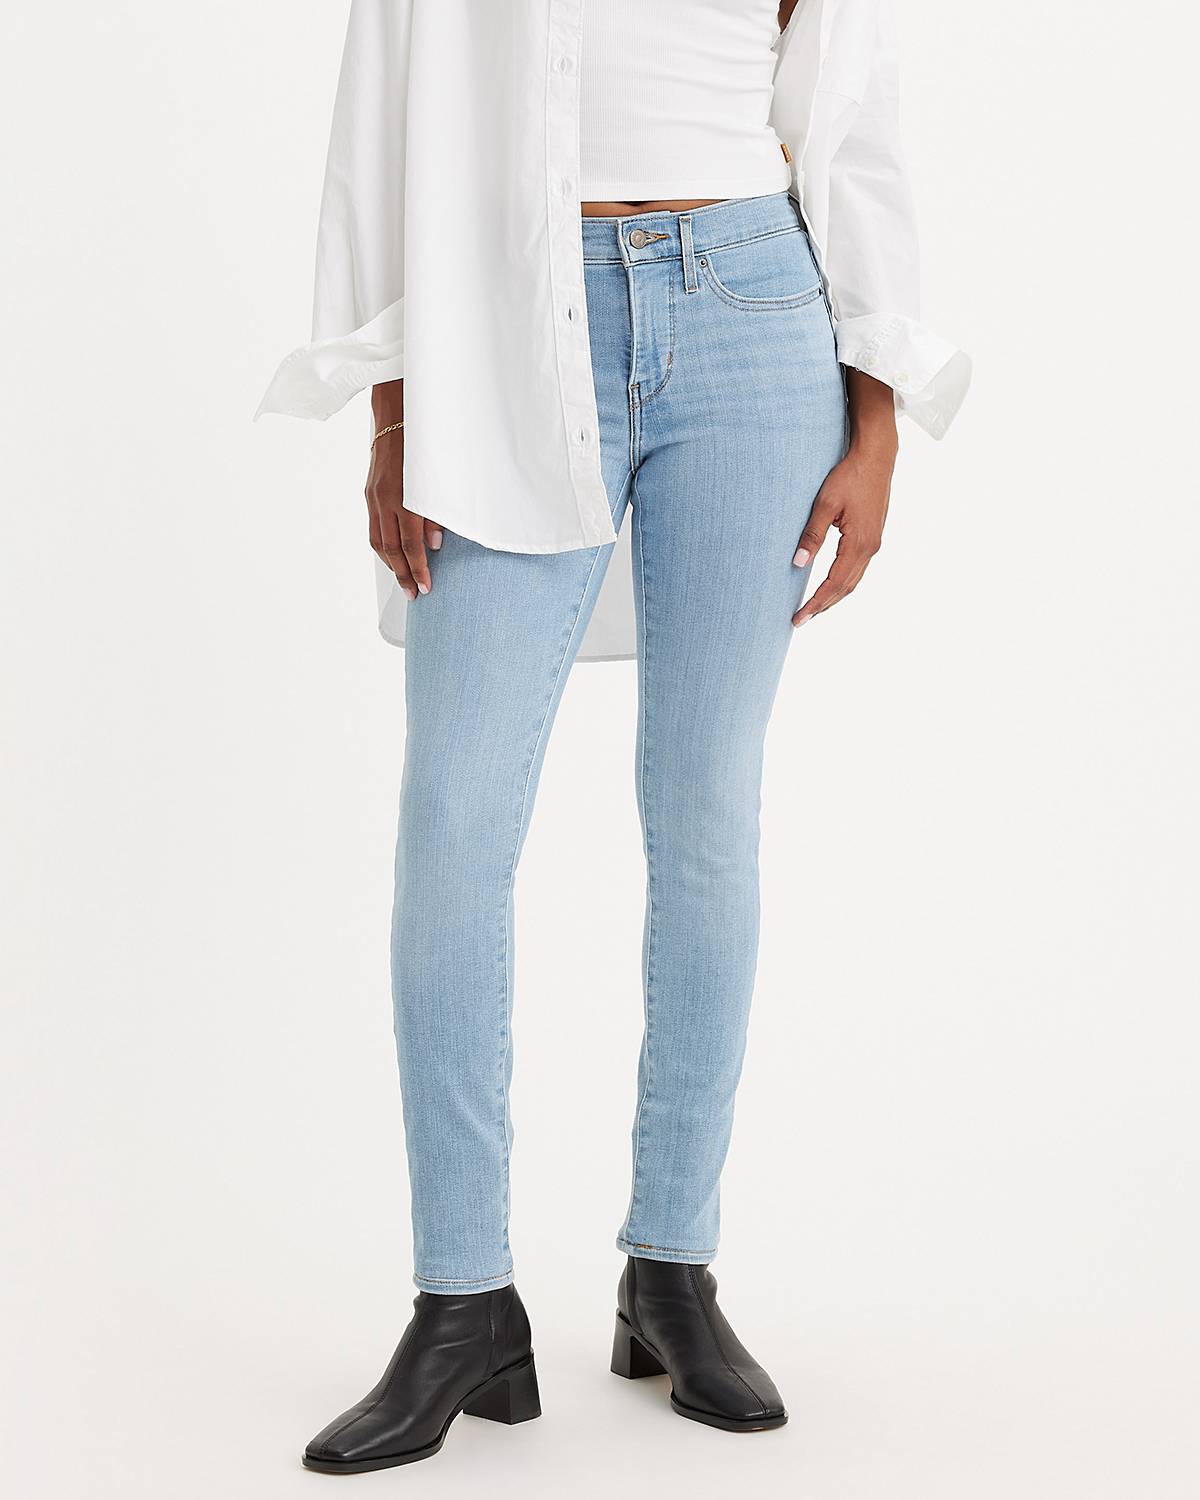 Keeping it casual in a simple white tee, skinny jeans, heels, and